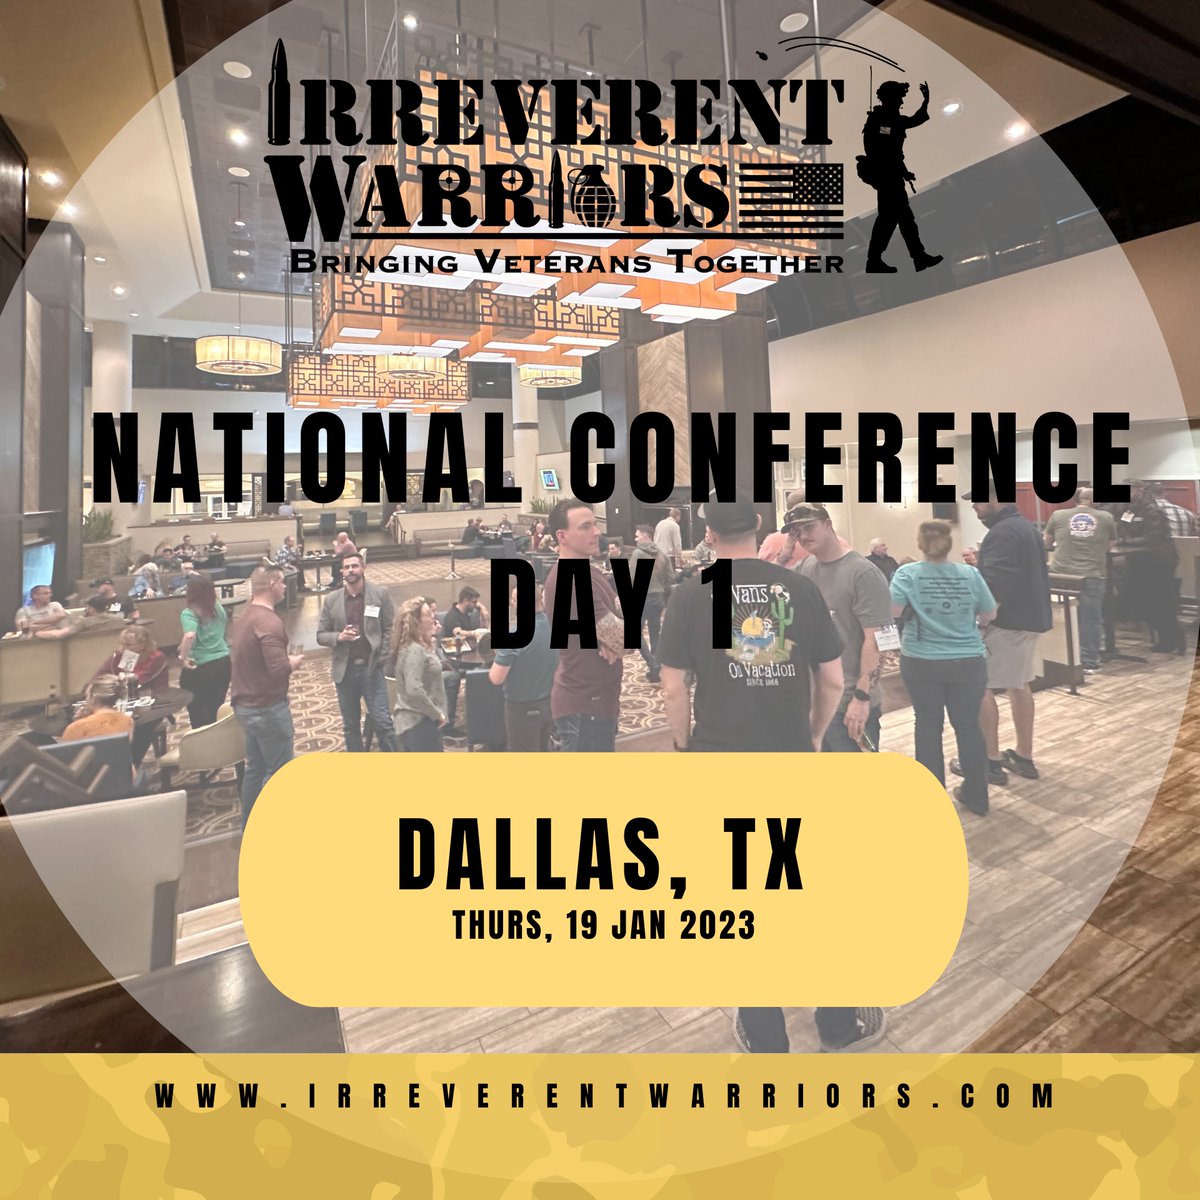 Wheels down: We are present and accounted for in Dallas! What a great first day. We are so grateful to be together. Good things are happening - stay tuned!

#irreverentwarriors | #silkieshike | #veteran | #community | #22untilnone | #suicideprevention | #iwnationalconference23